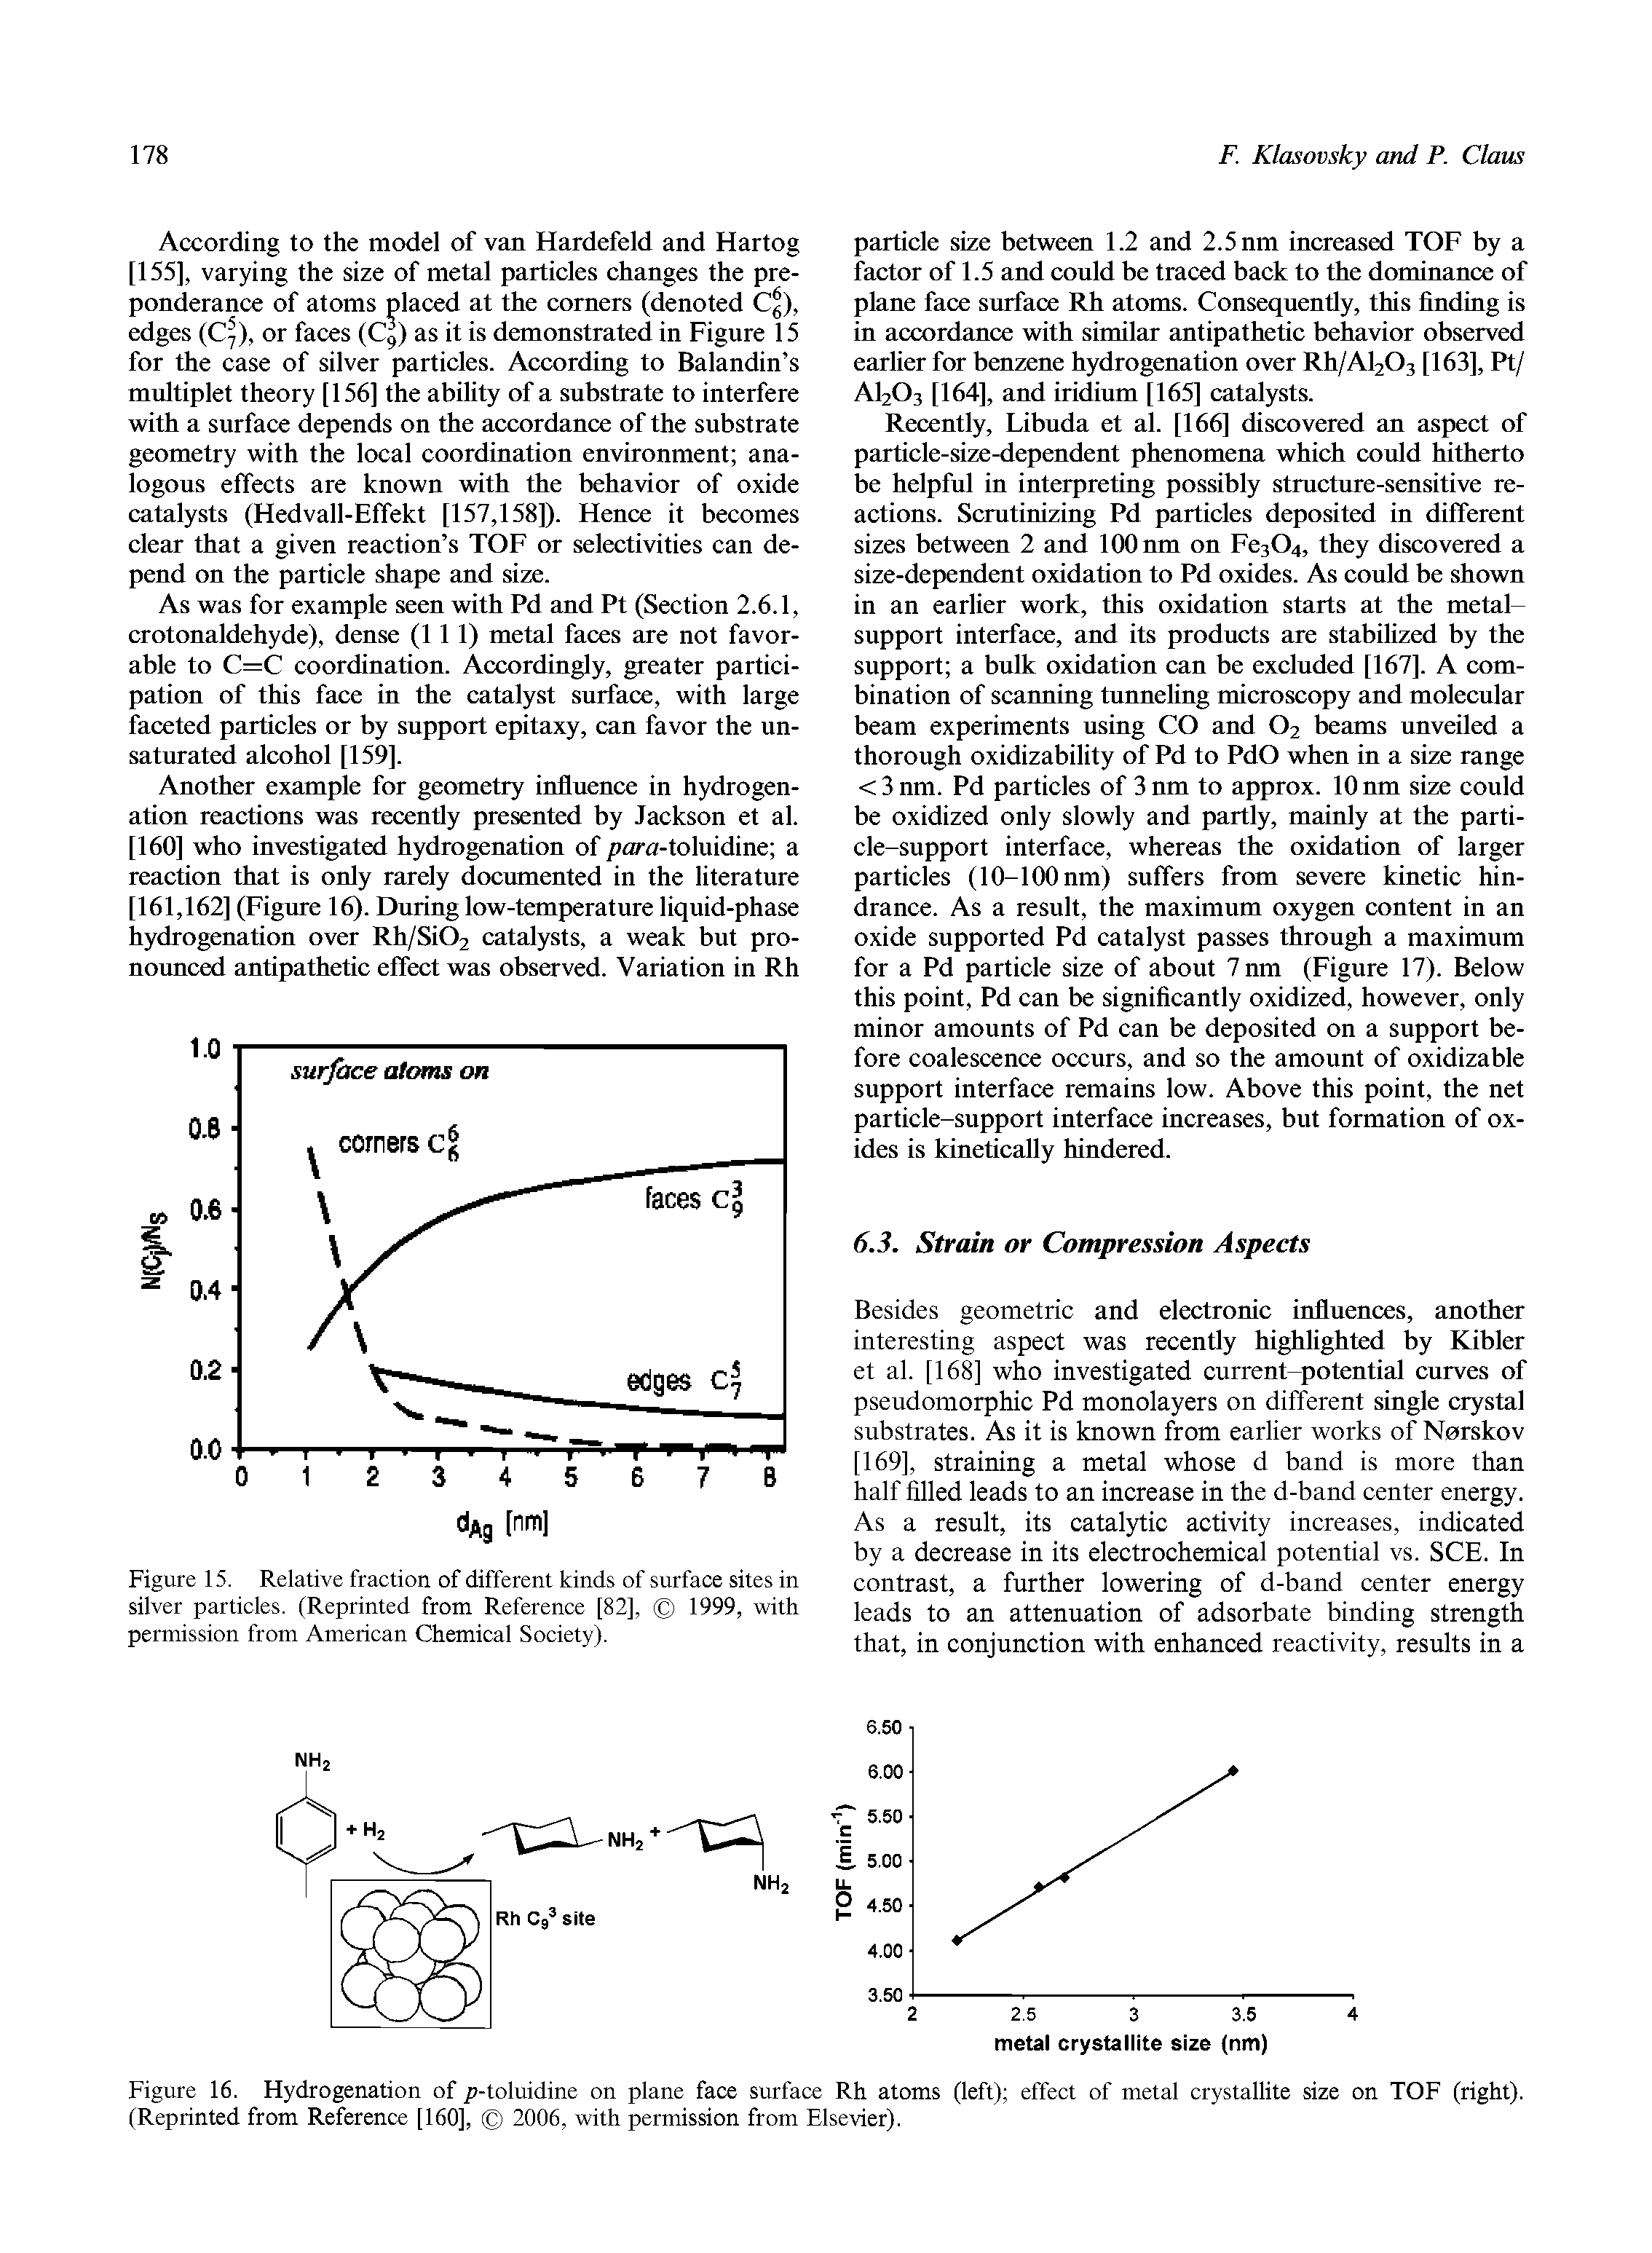 Figure 16. Hydrogenation of i-toluidine on plane face surface Rh atoms (left) effect of metal crystallite size on TOF (right). (Reprinted from Reference [160], 2006, with permission from Elsevier).